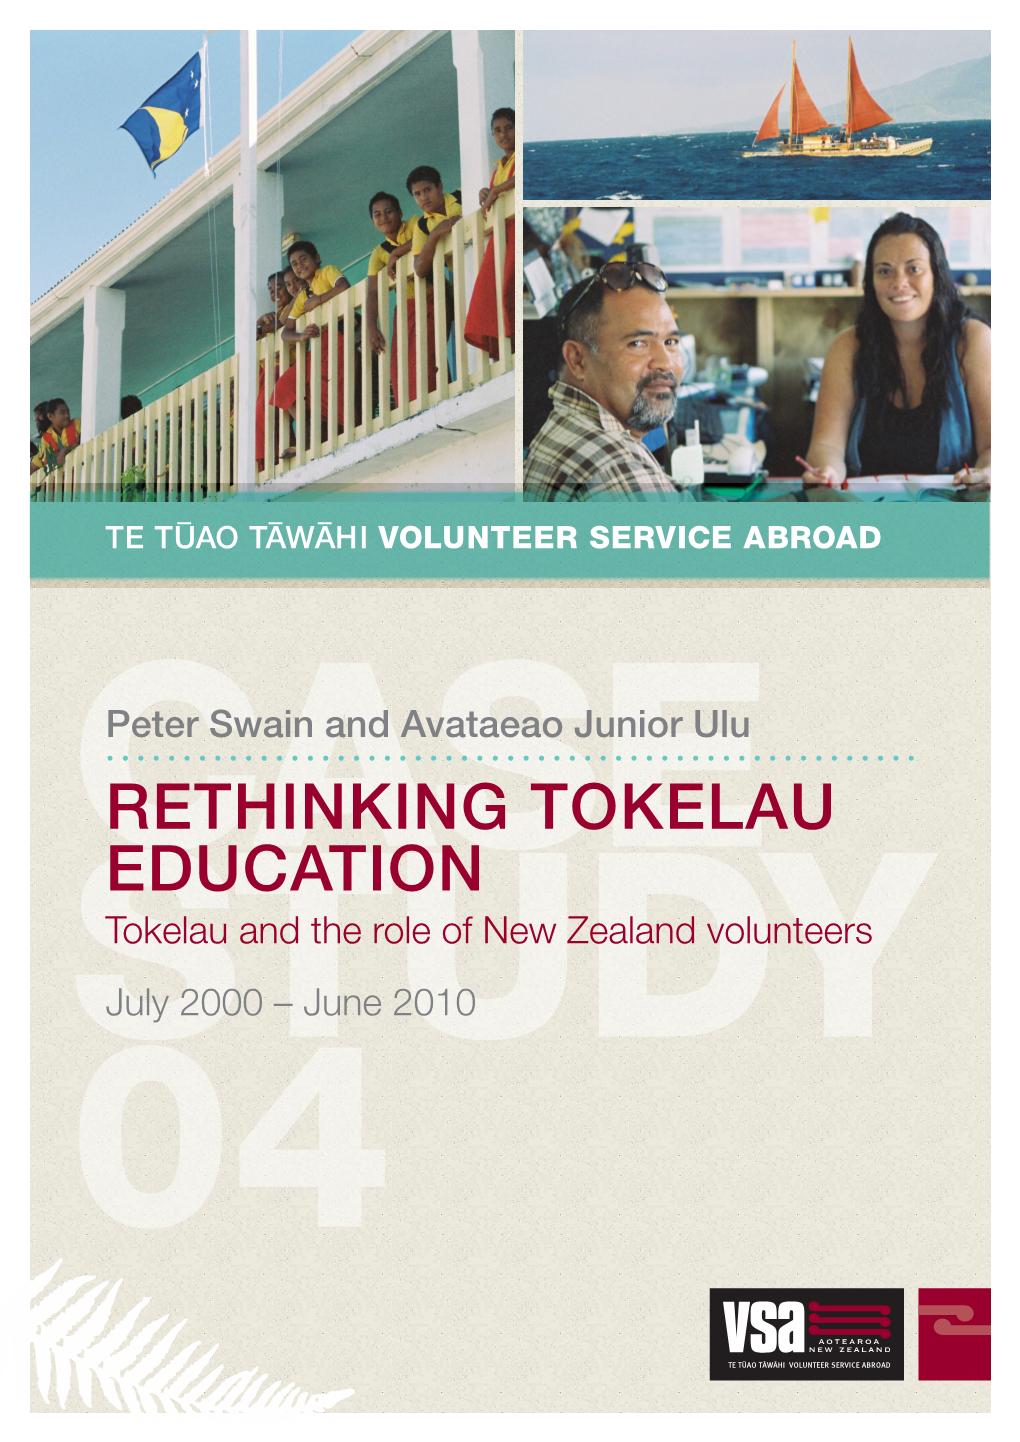 RETHINKING TOKELAU EDUCATION Chapter 1 Why Was the Volunteer Programme in Tokelau Established, and What Were Its Objectives?